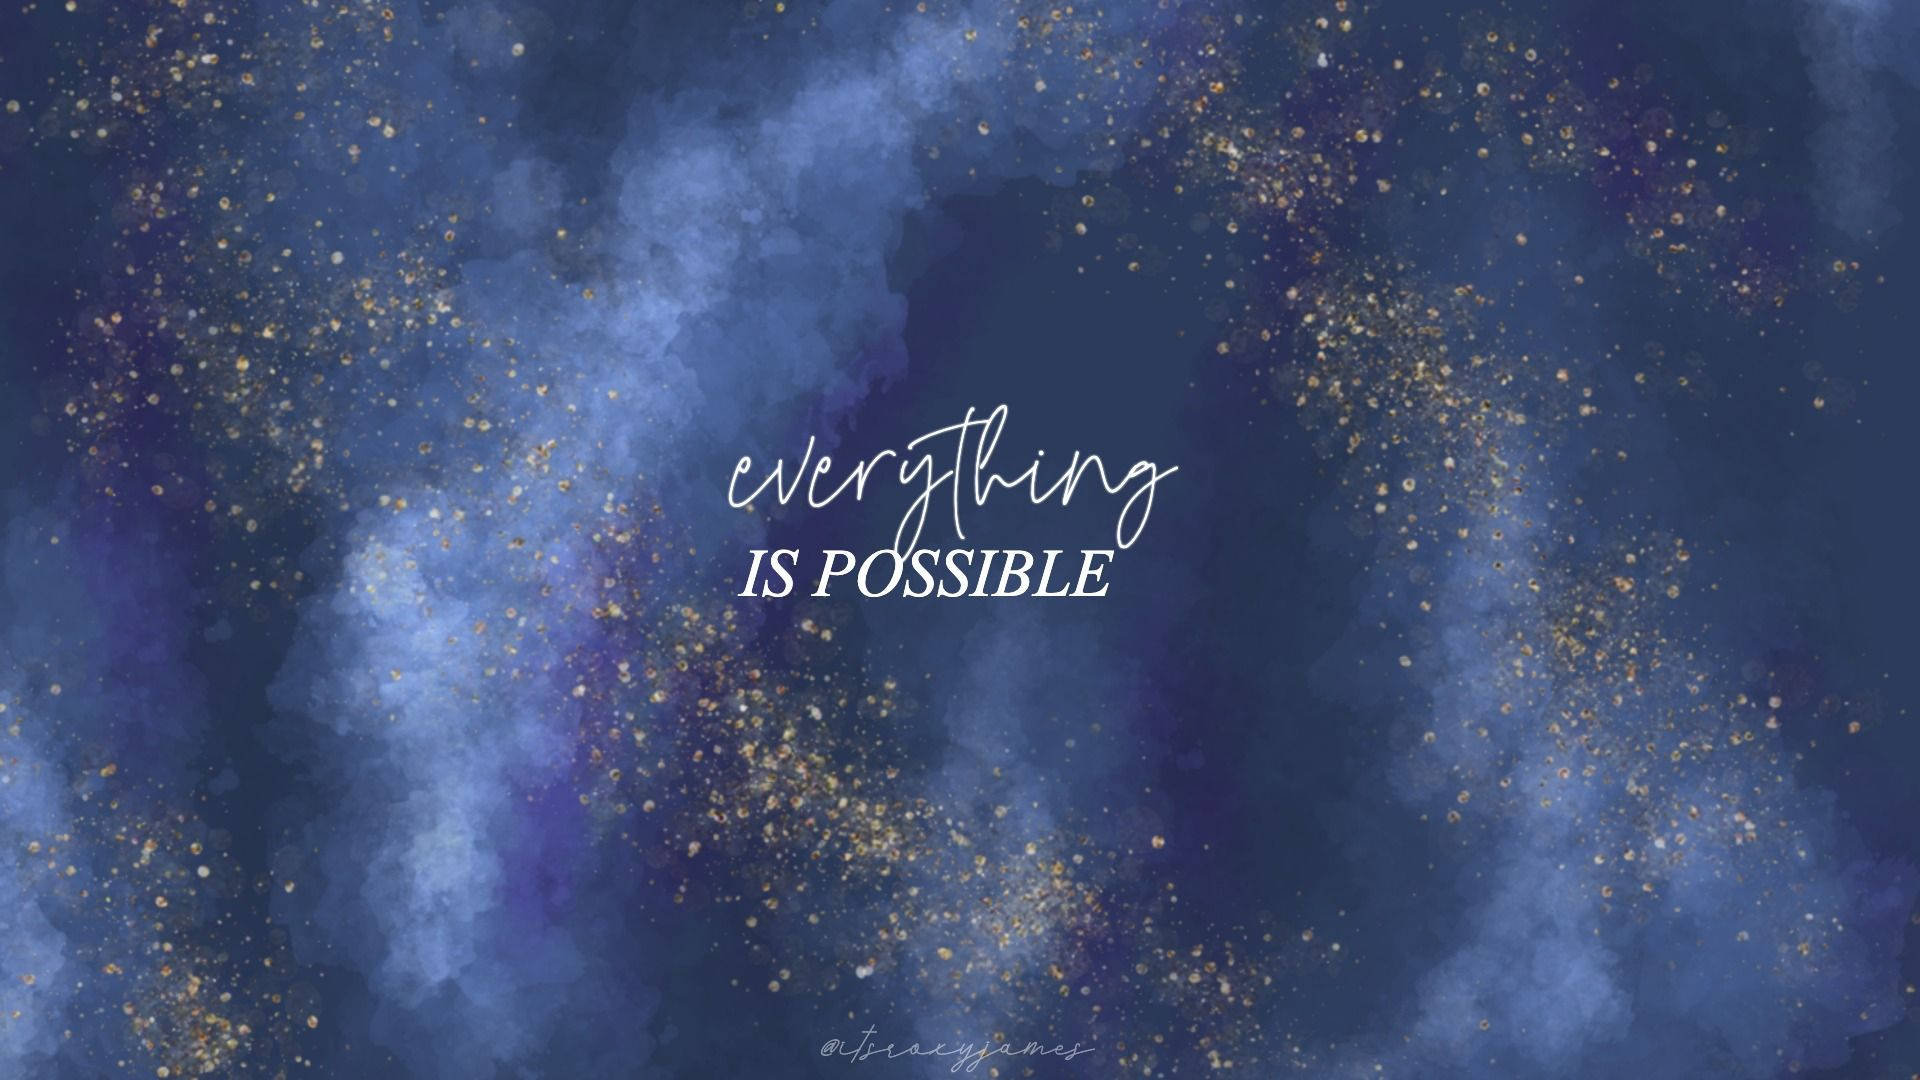 Nothing Is Impossible Full Hd Wallpaper for Desktop and Mobiles 768x1280 -  HD Wallpaper - Wallpapers.net